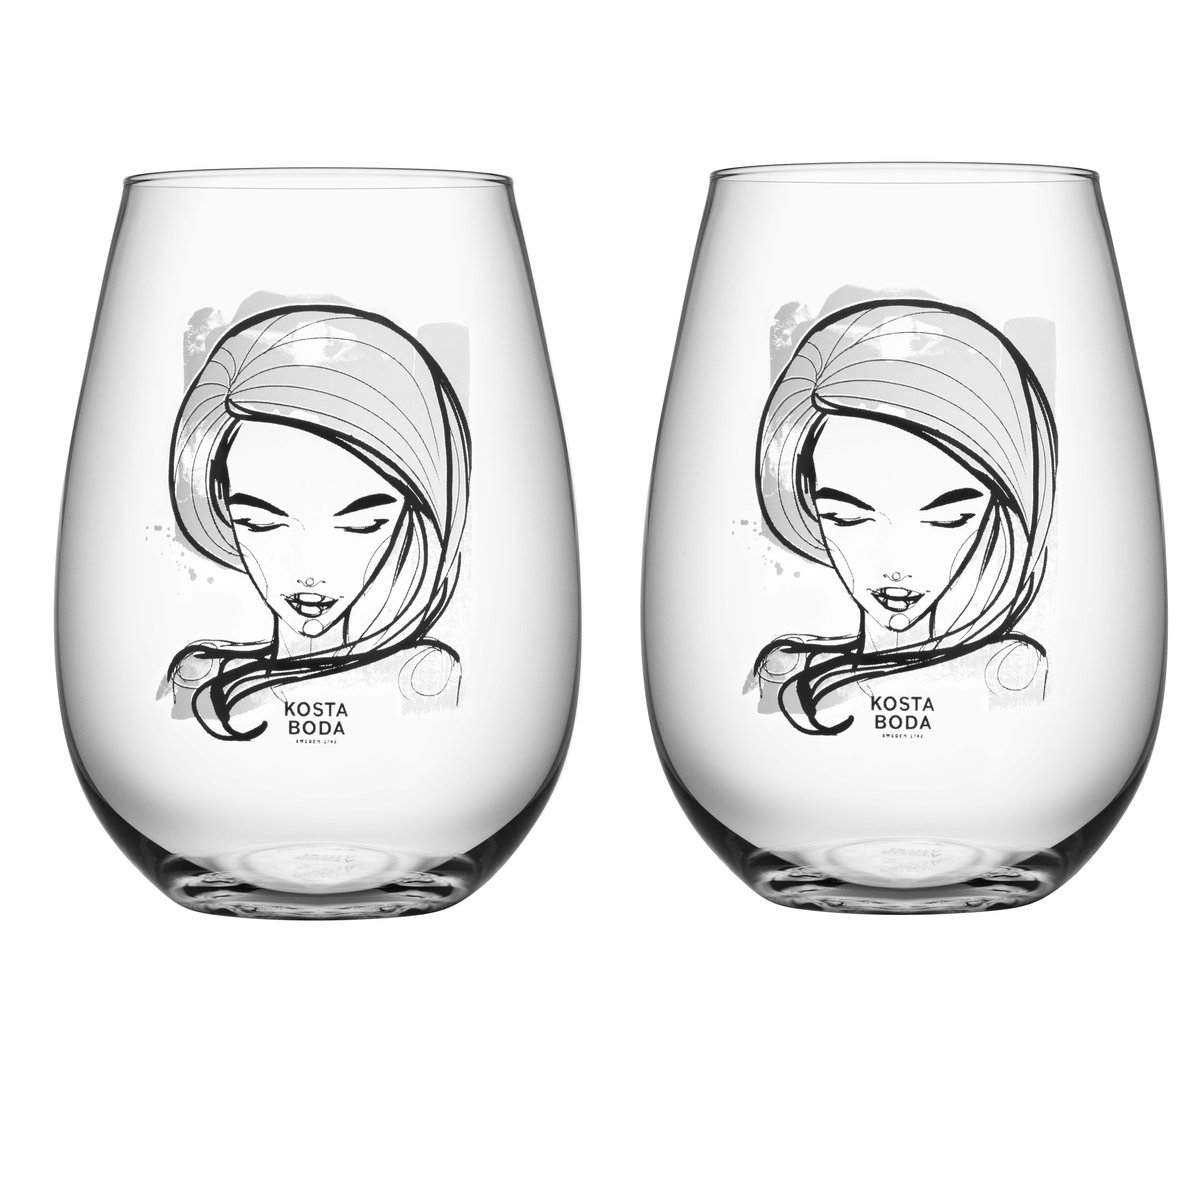 All about you glas 2-pack need you (vit)